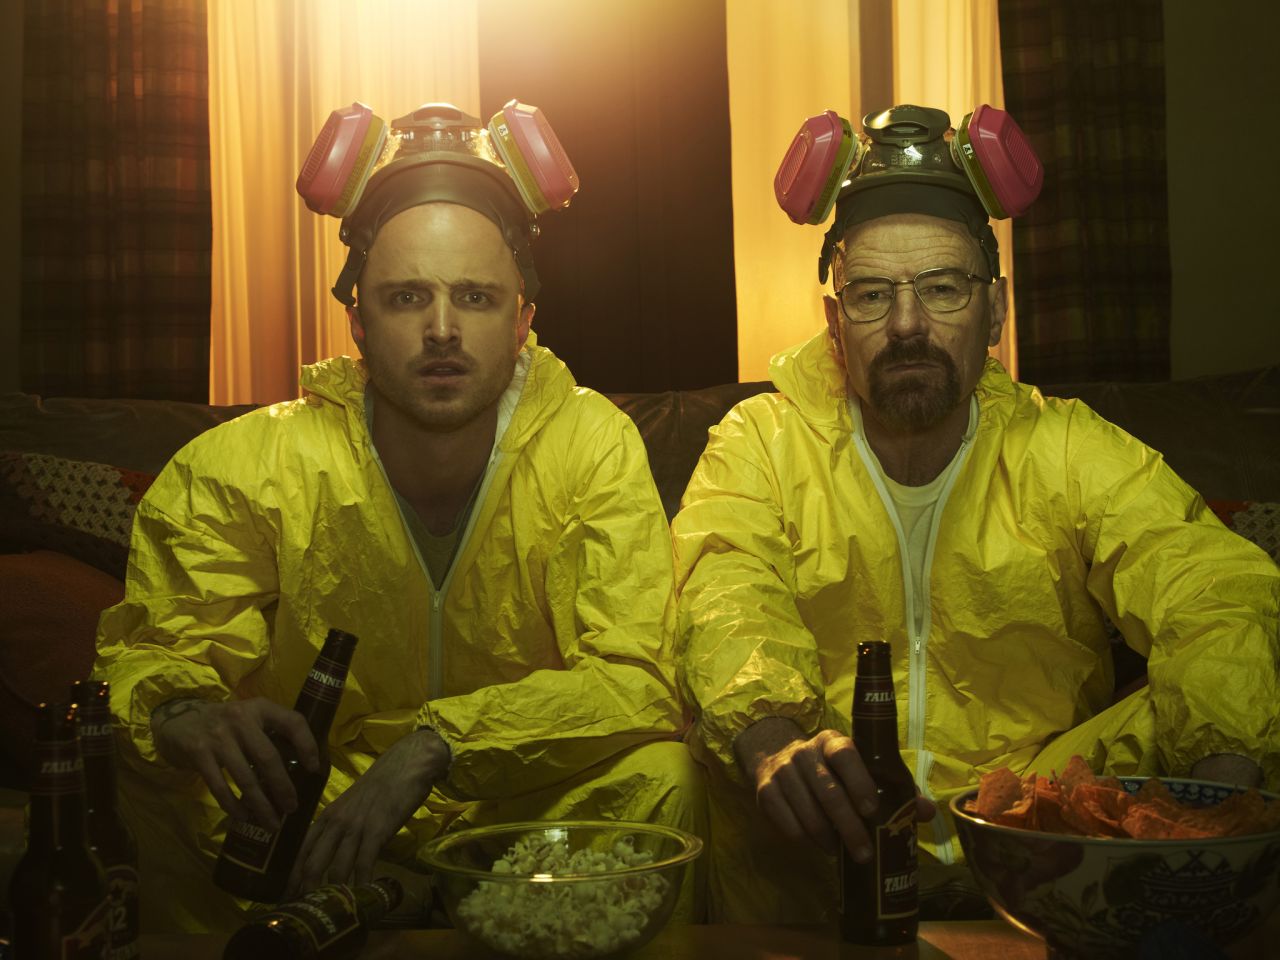 The AMC drama "Breaking Bad," about a former high-school chemistry teacher turned corrupt meth kingpin, aired its final episode in September 2013, and fans still haven't stopped talking about it -- or gotten over the show ending. Overall, many seemed more upset that the series was over than about how it ended.